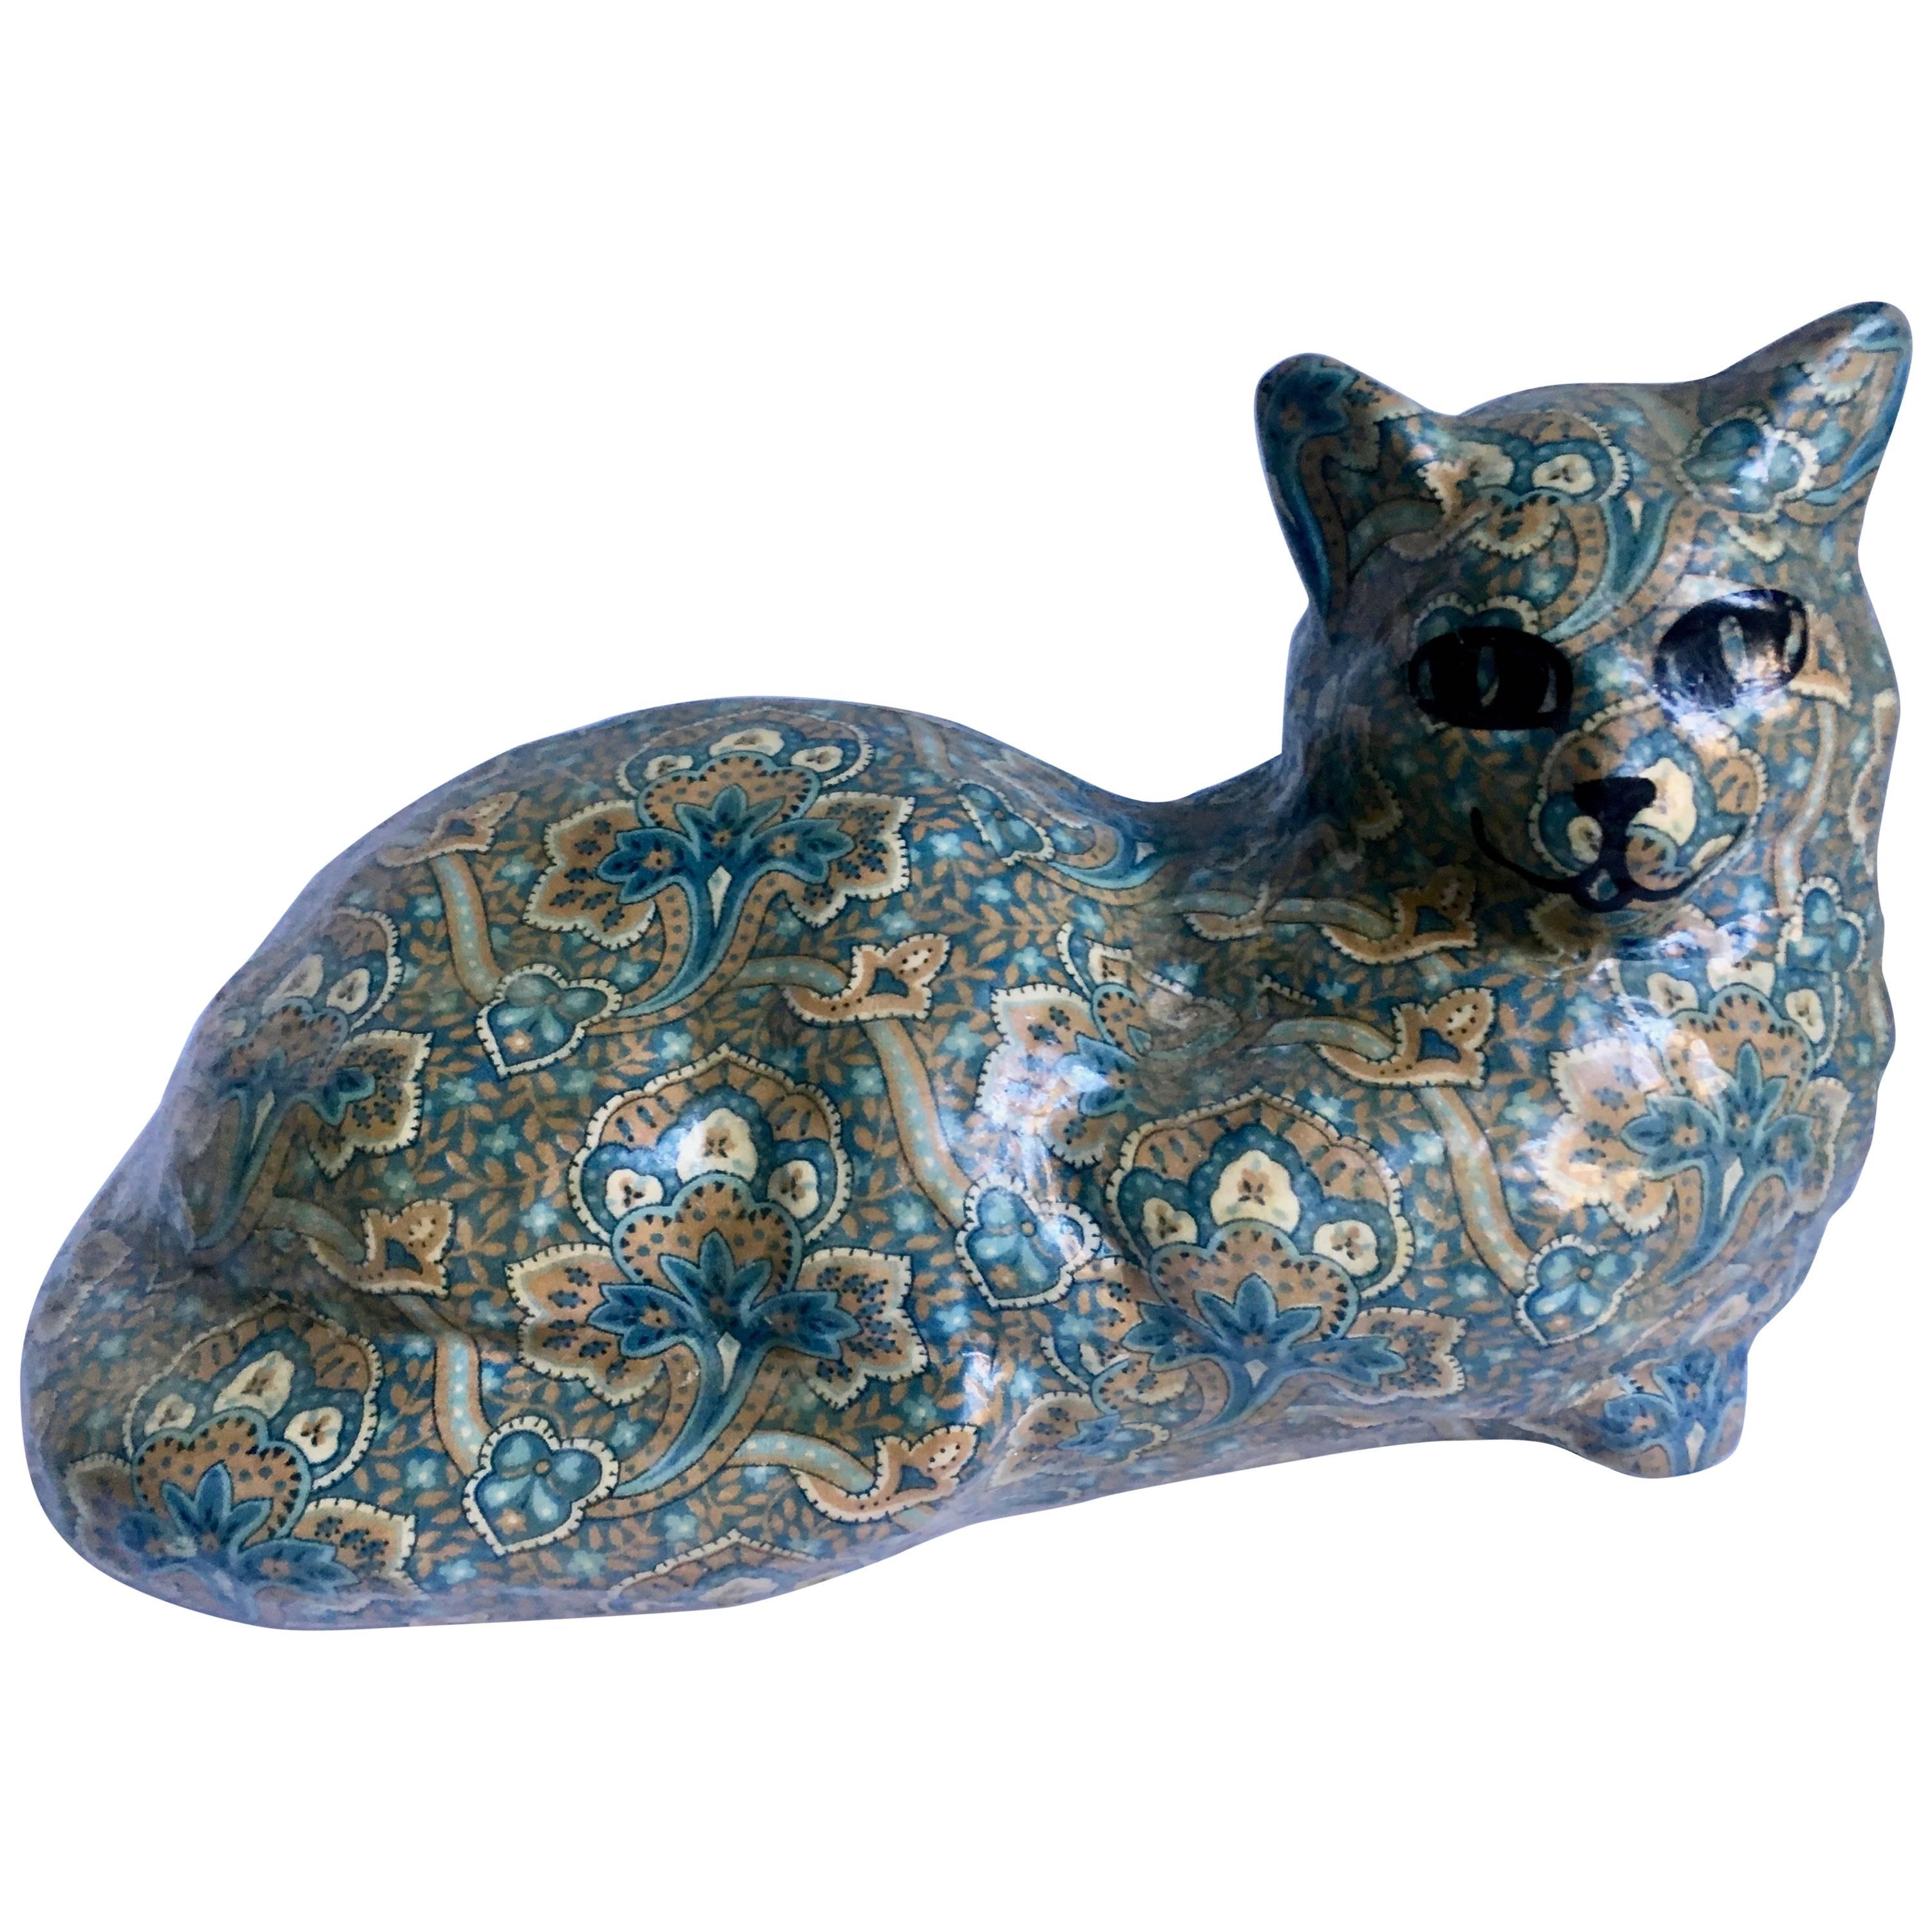 Signed and Numbered Pottery Cat